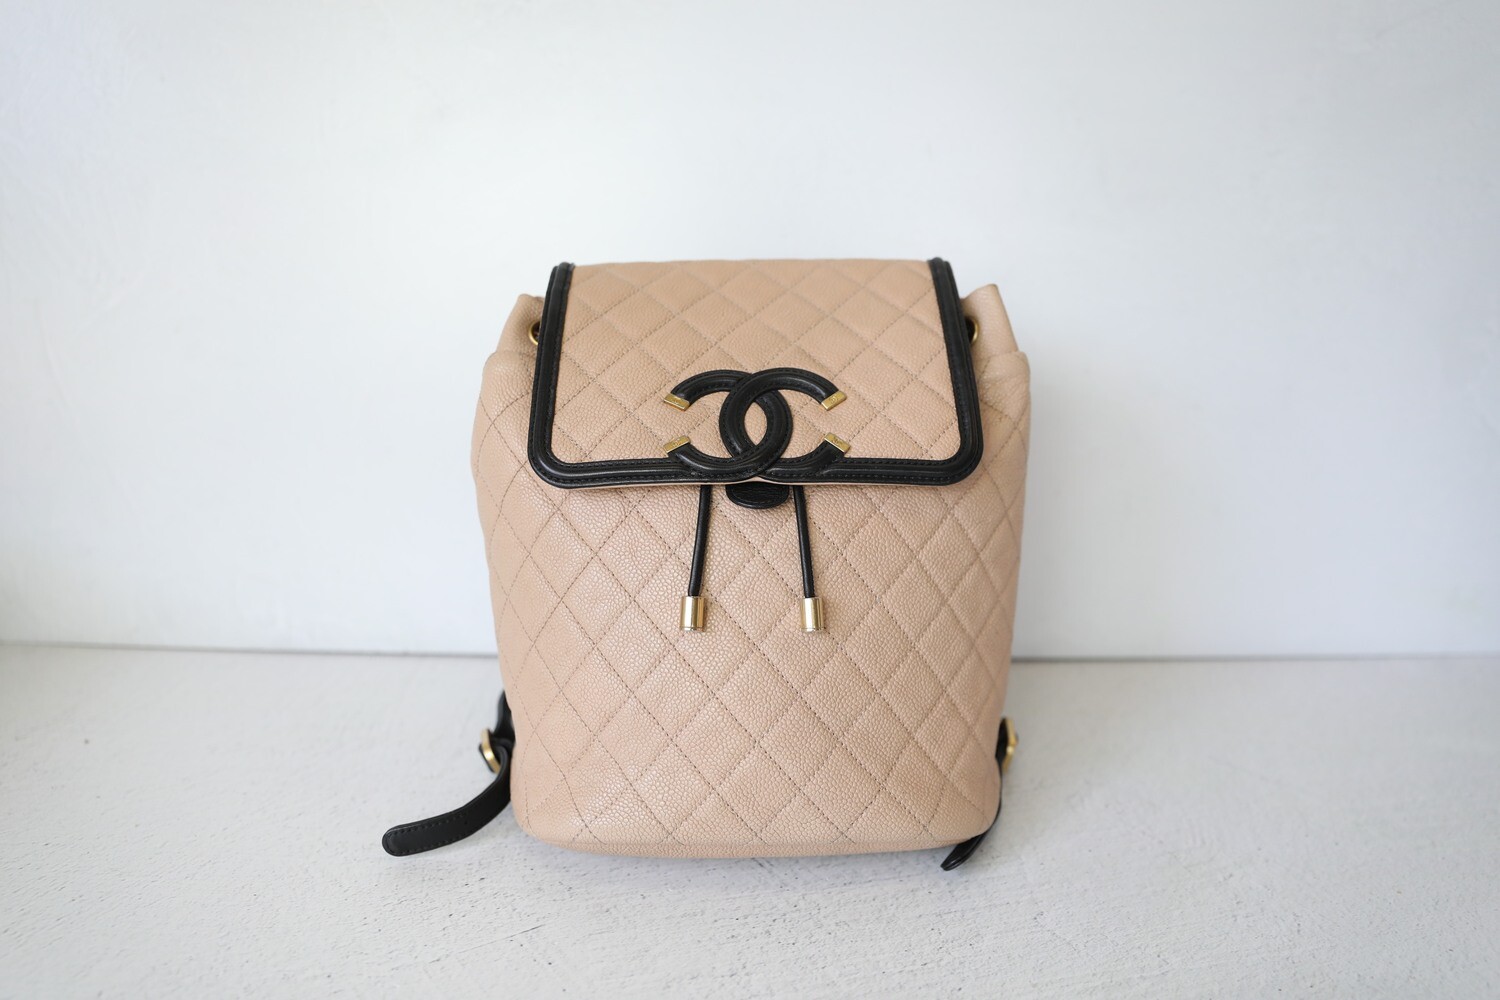 Chanel Filigree Backpack Medium, Beige and Black Caviar with Gold Hardware,  Preowned No Dustbag WA001 - Julia Rose Boston